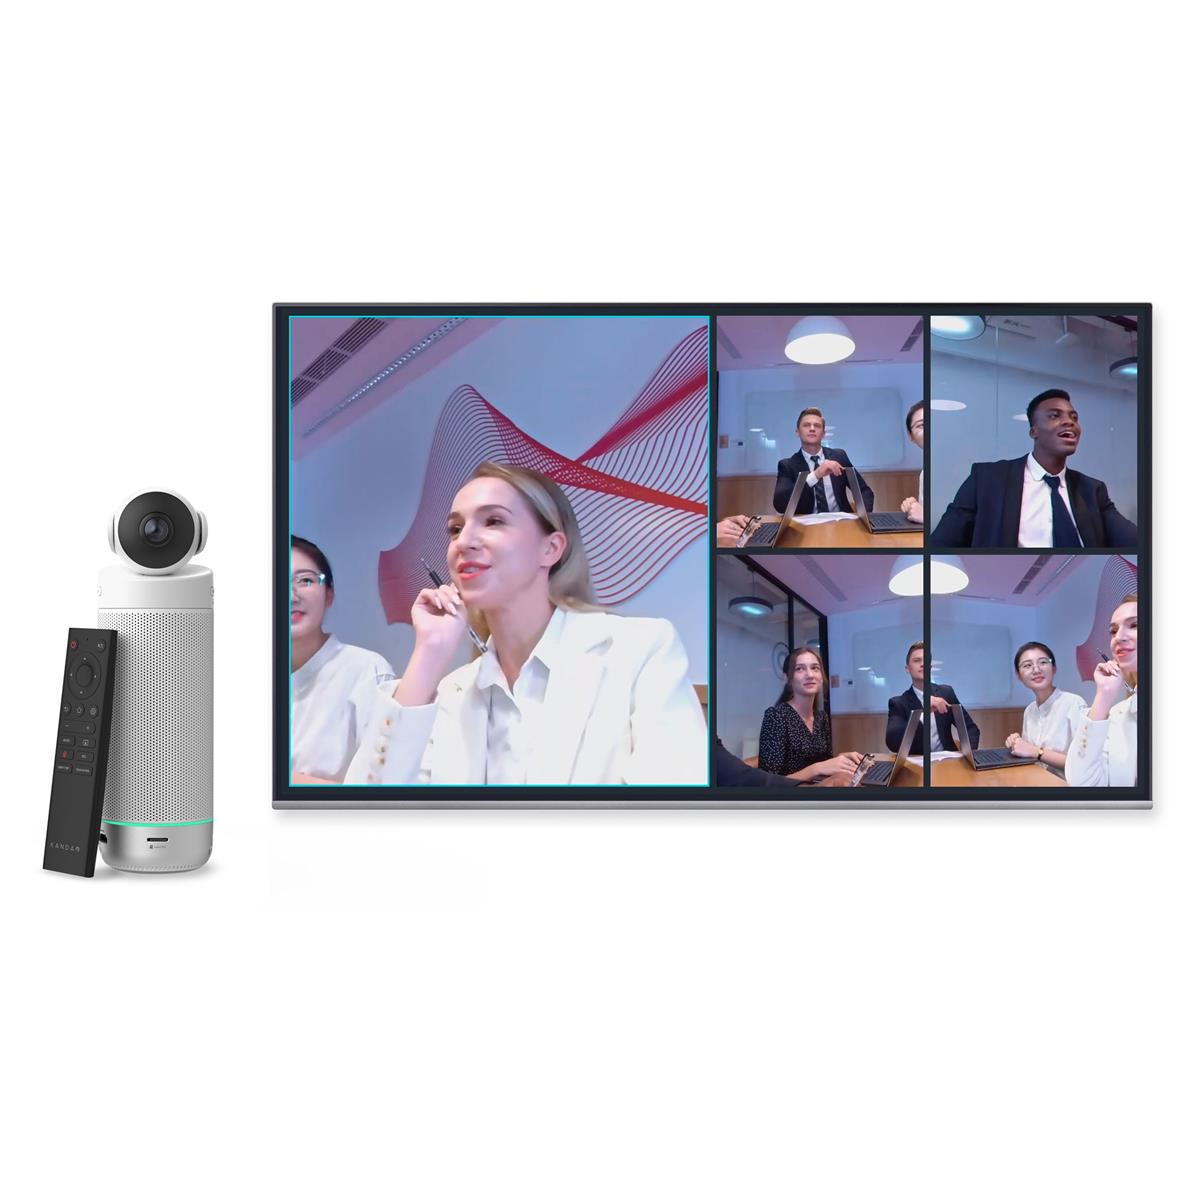 Kandao Meeting S 180 Degree All-In-One Conferencing Camara 257286